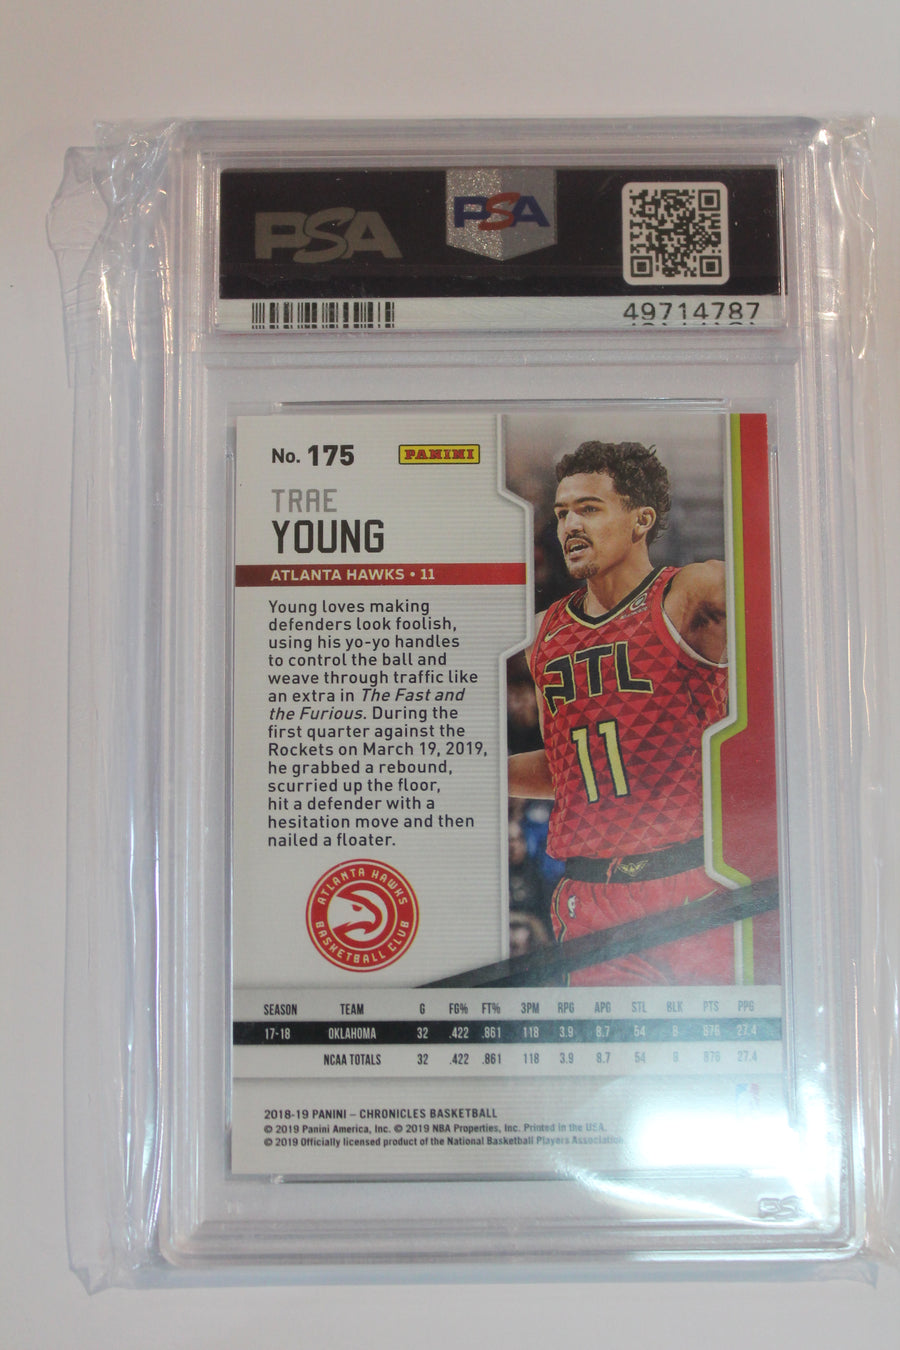 Trae Young 2018 Panini Chronicles Graded Rookie Card PSA 9